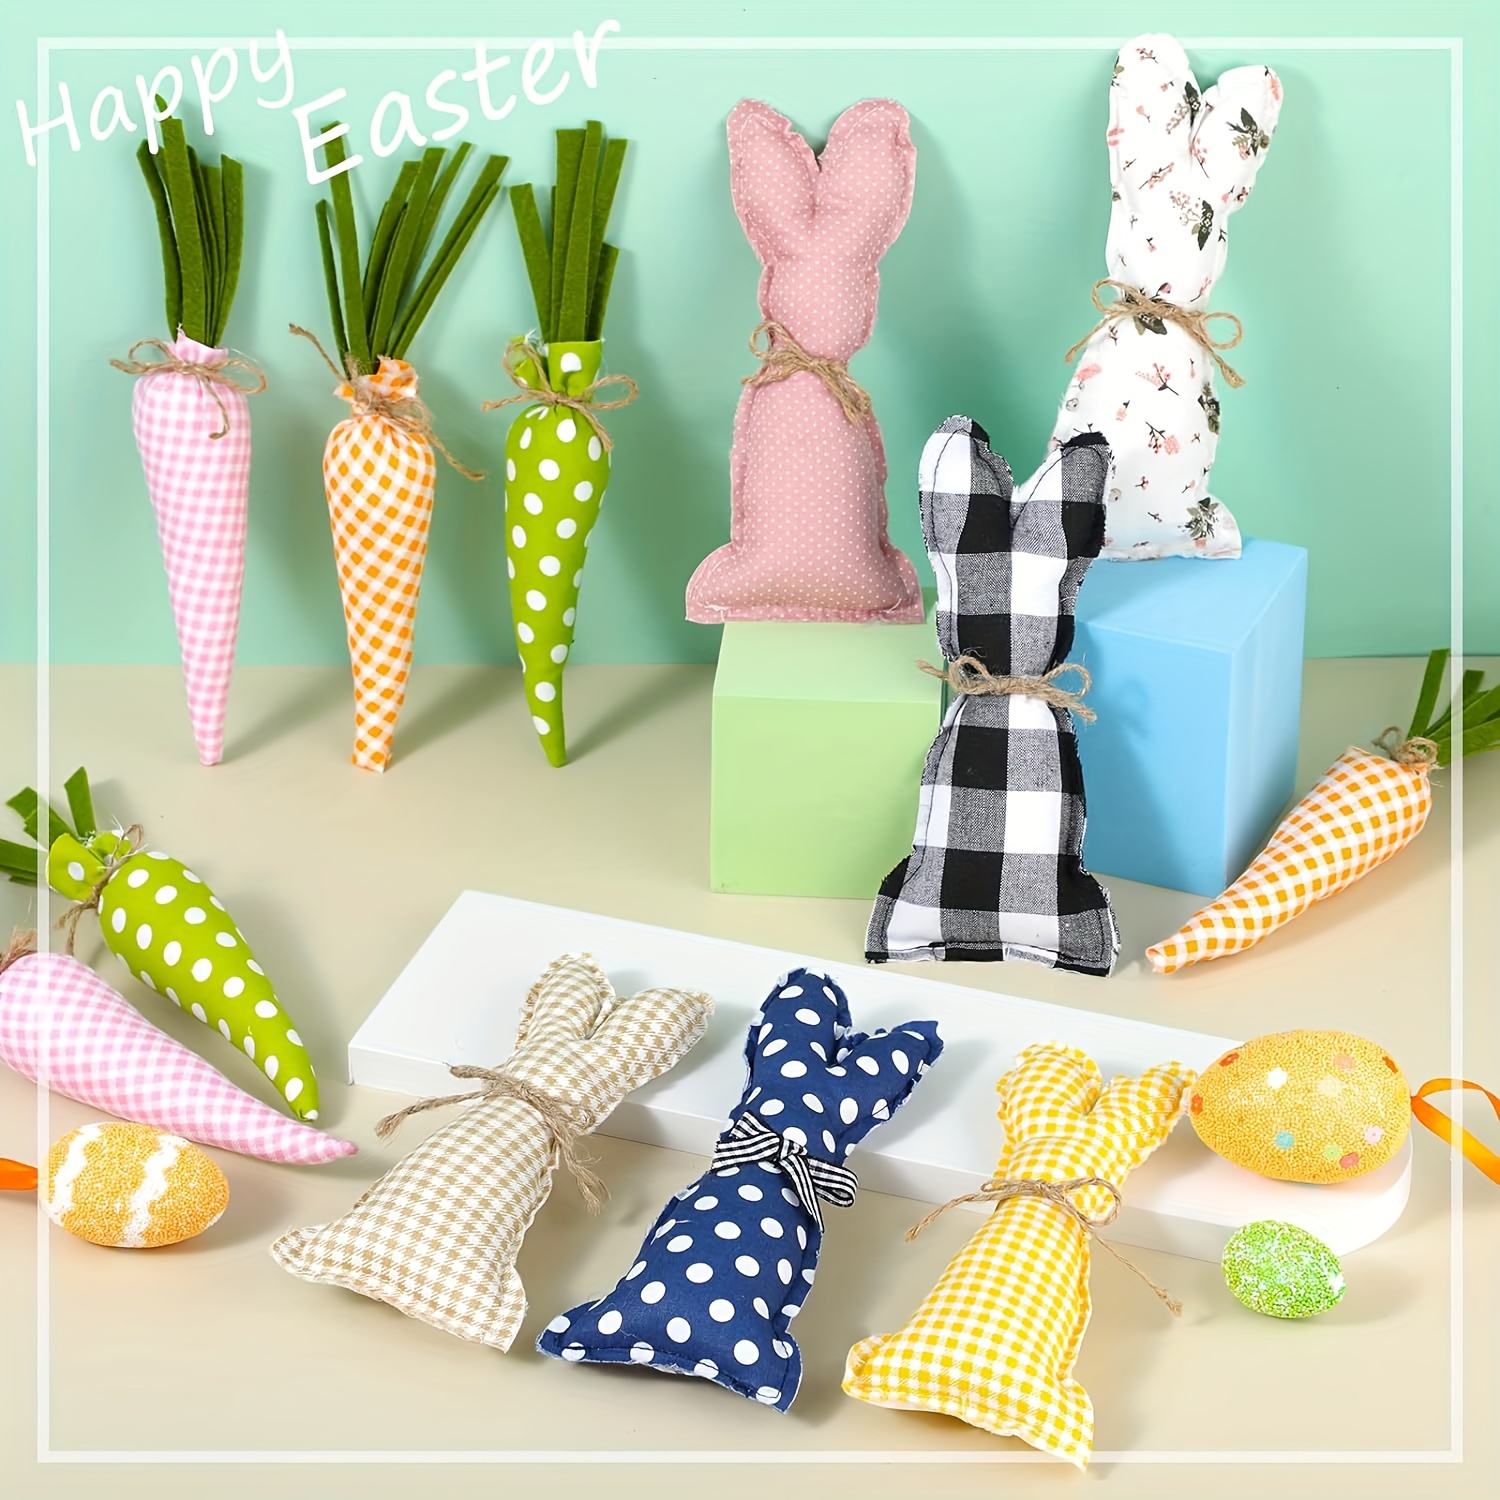 12pcs stuffed fabric bunnies easter table top rustic farmhouse decor plush carrot bunny decor rabbit decor tall vase filler decor for desk counter tiered tray wedding home exquisite soft craft